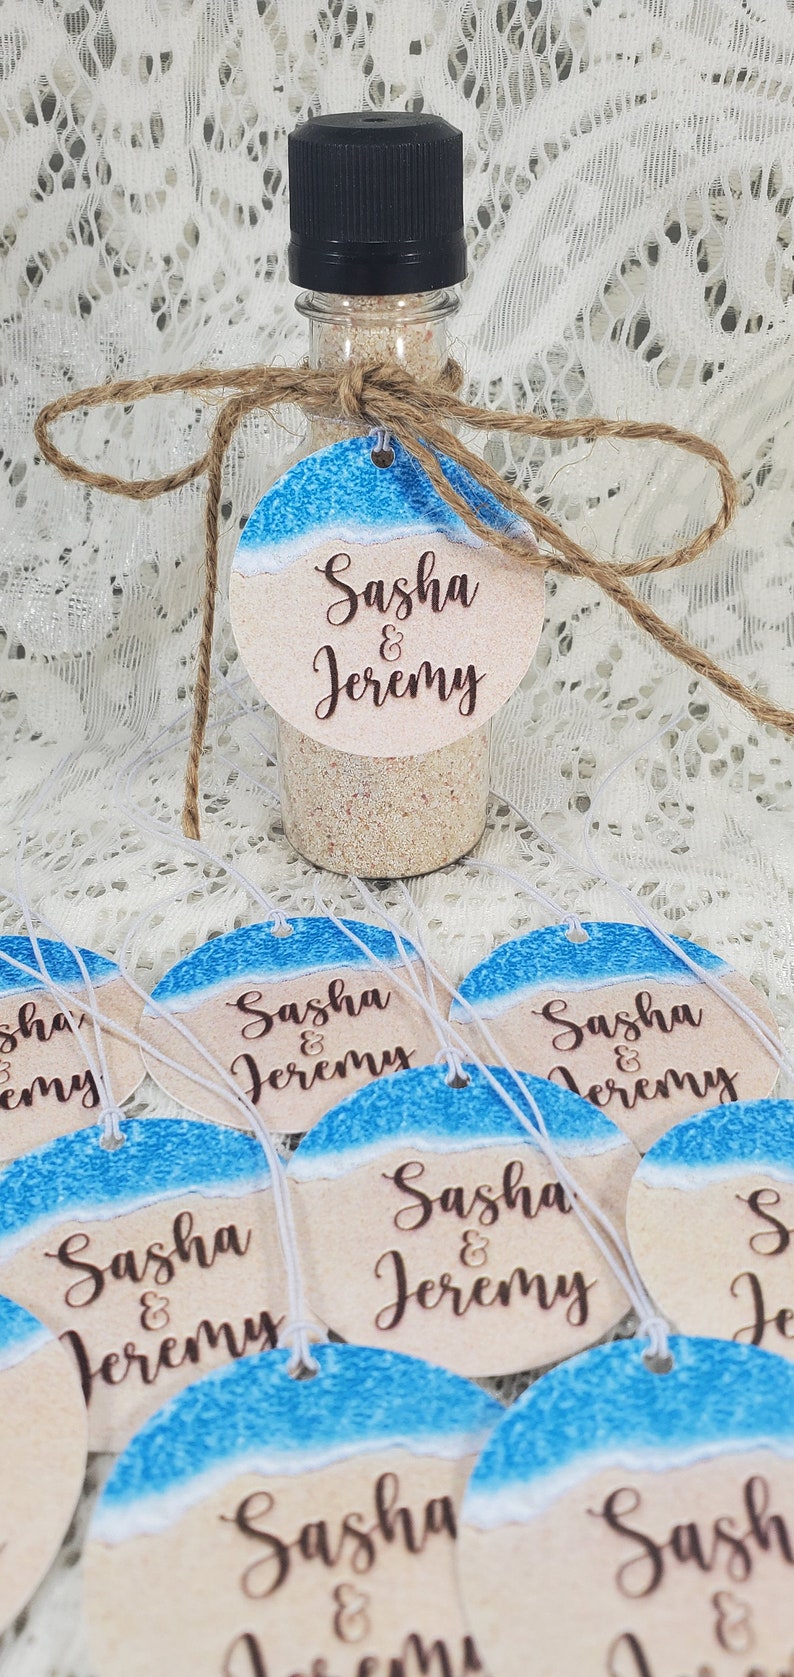 Beach Theme 110 lb. Cardstock Personalized Tags for Destination Wedding Birthday Anniversary Sand Ocean Favor w/string image 4